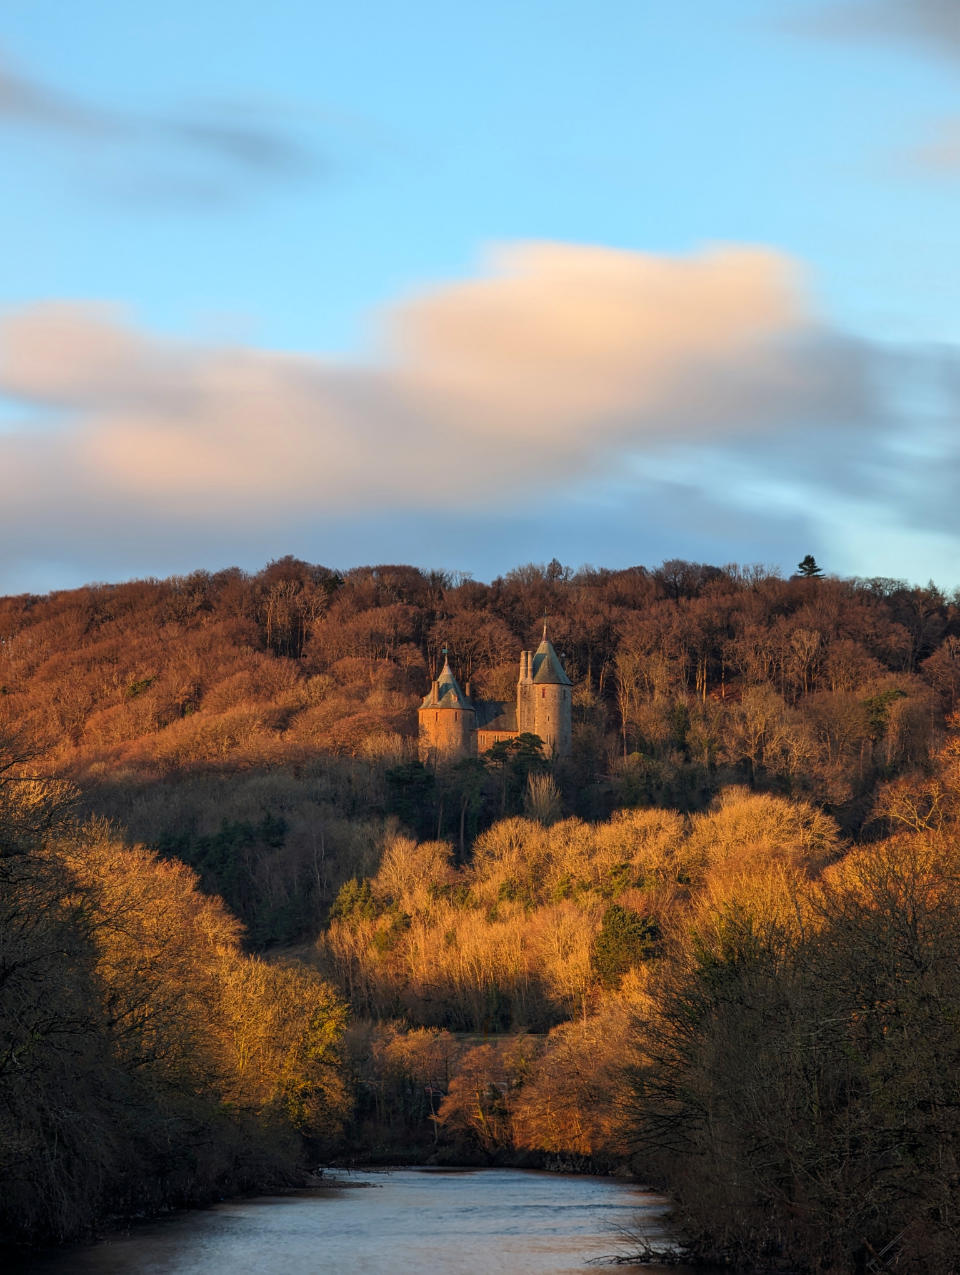 Castell Coch above the River Taff in Tongwynlais, Cardiff. The surrounding forest is a rich autumnal brown.